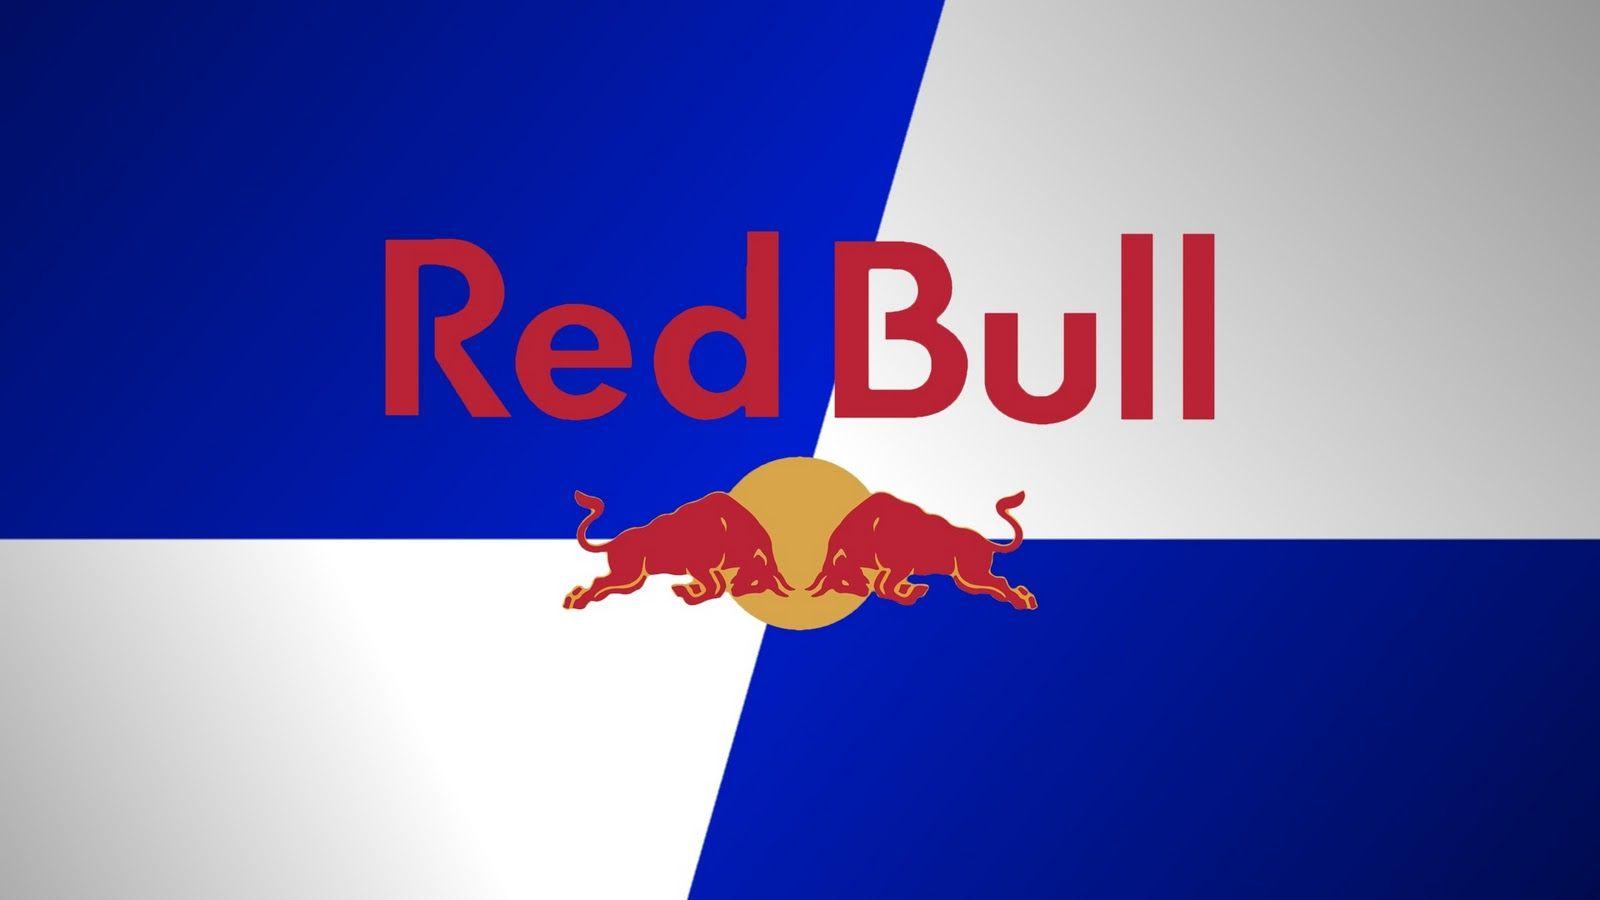 Red Bull Energy Drink Logo - The Red Bull Brand is More Than Just an Energy Drink it is a Media